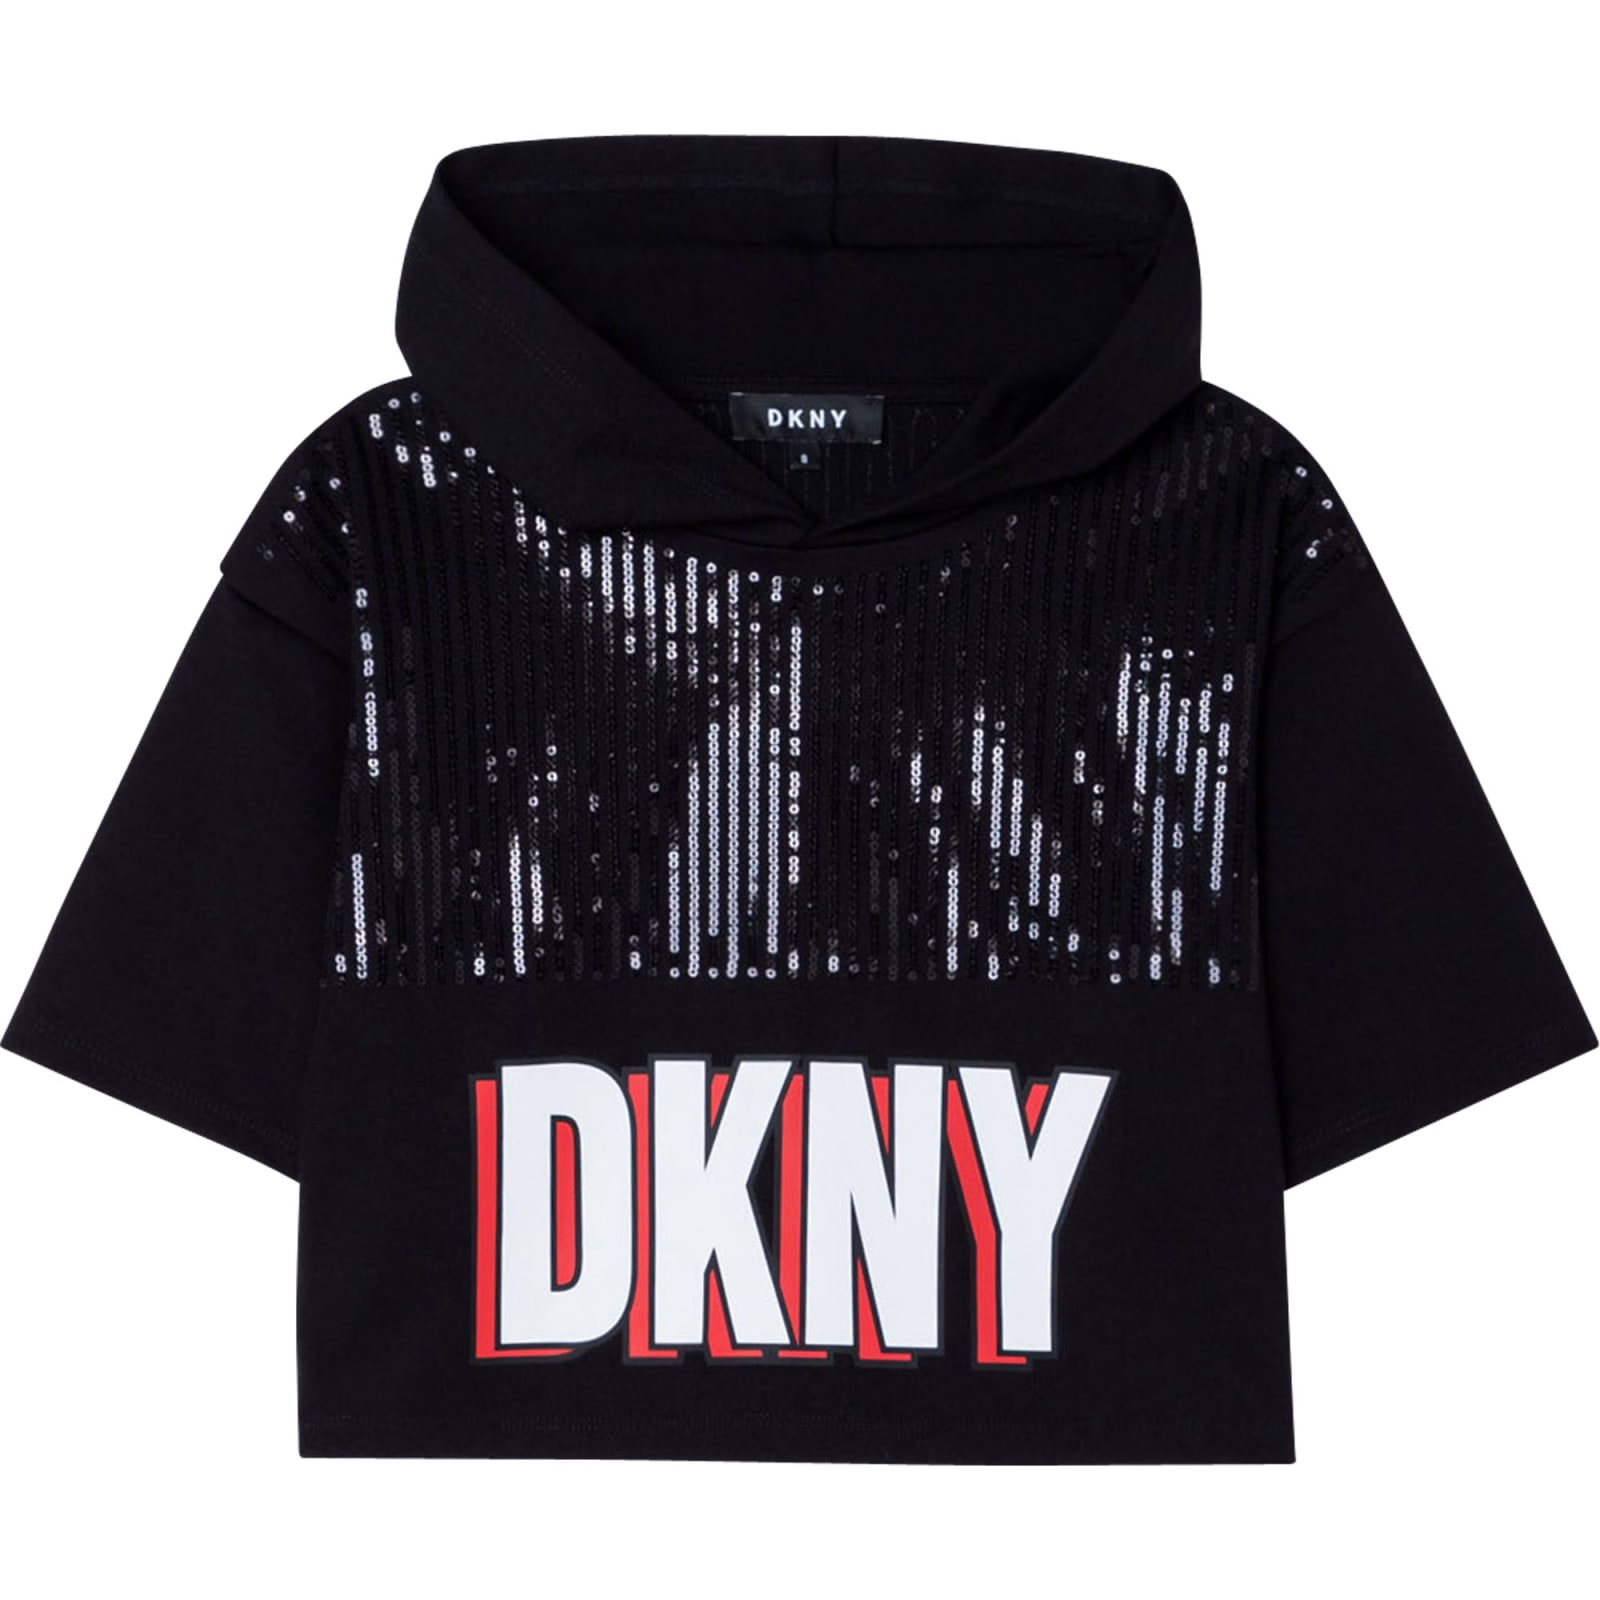 DKNY Sweatshirt With Sequins